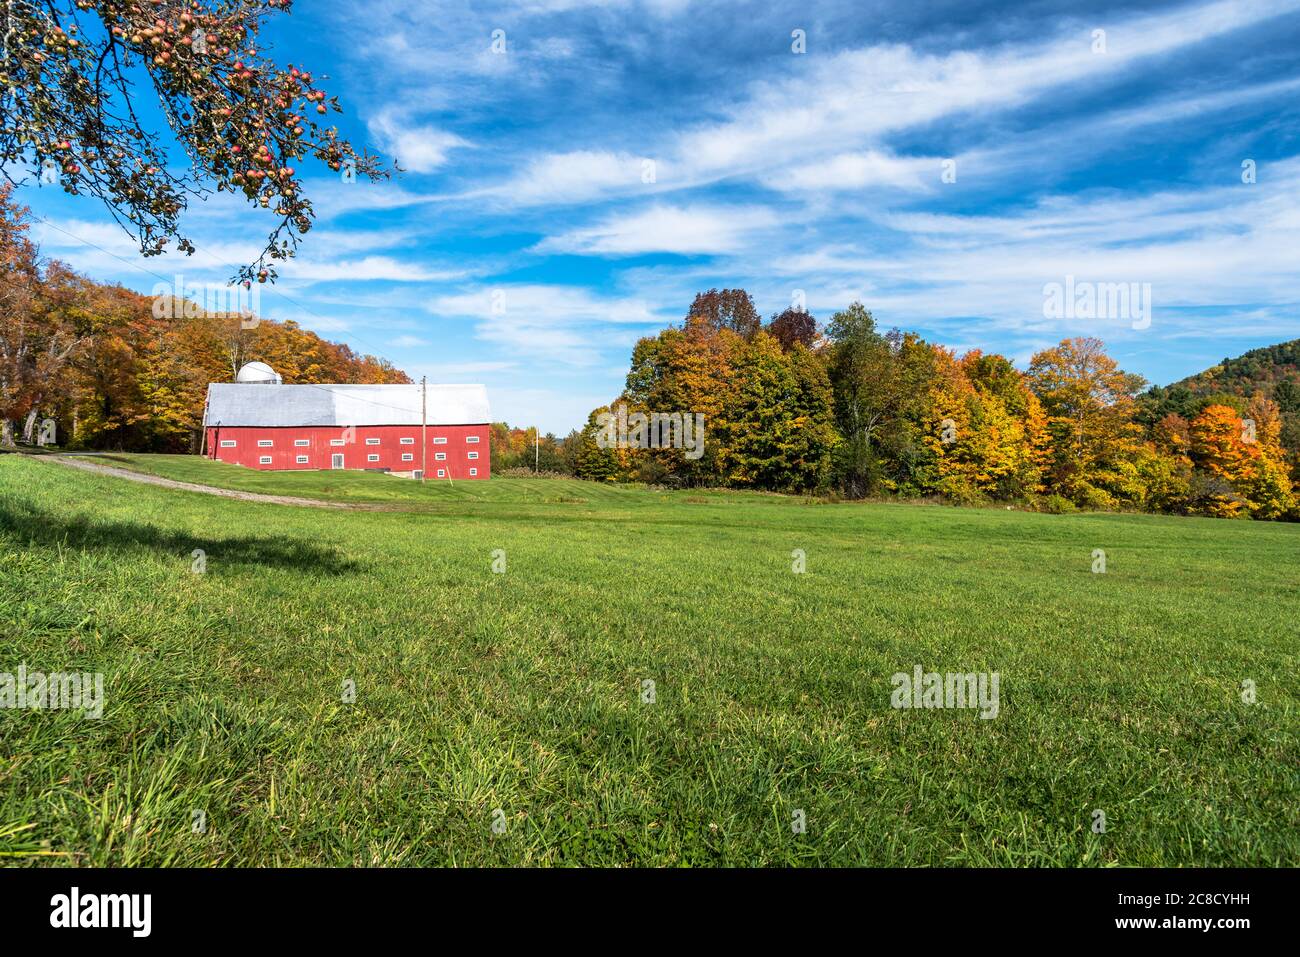 Rural scenery with a traditional red barn at the far end of field and trees at the peak of fall foliage in background on a clear autumn day Stock Photo